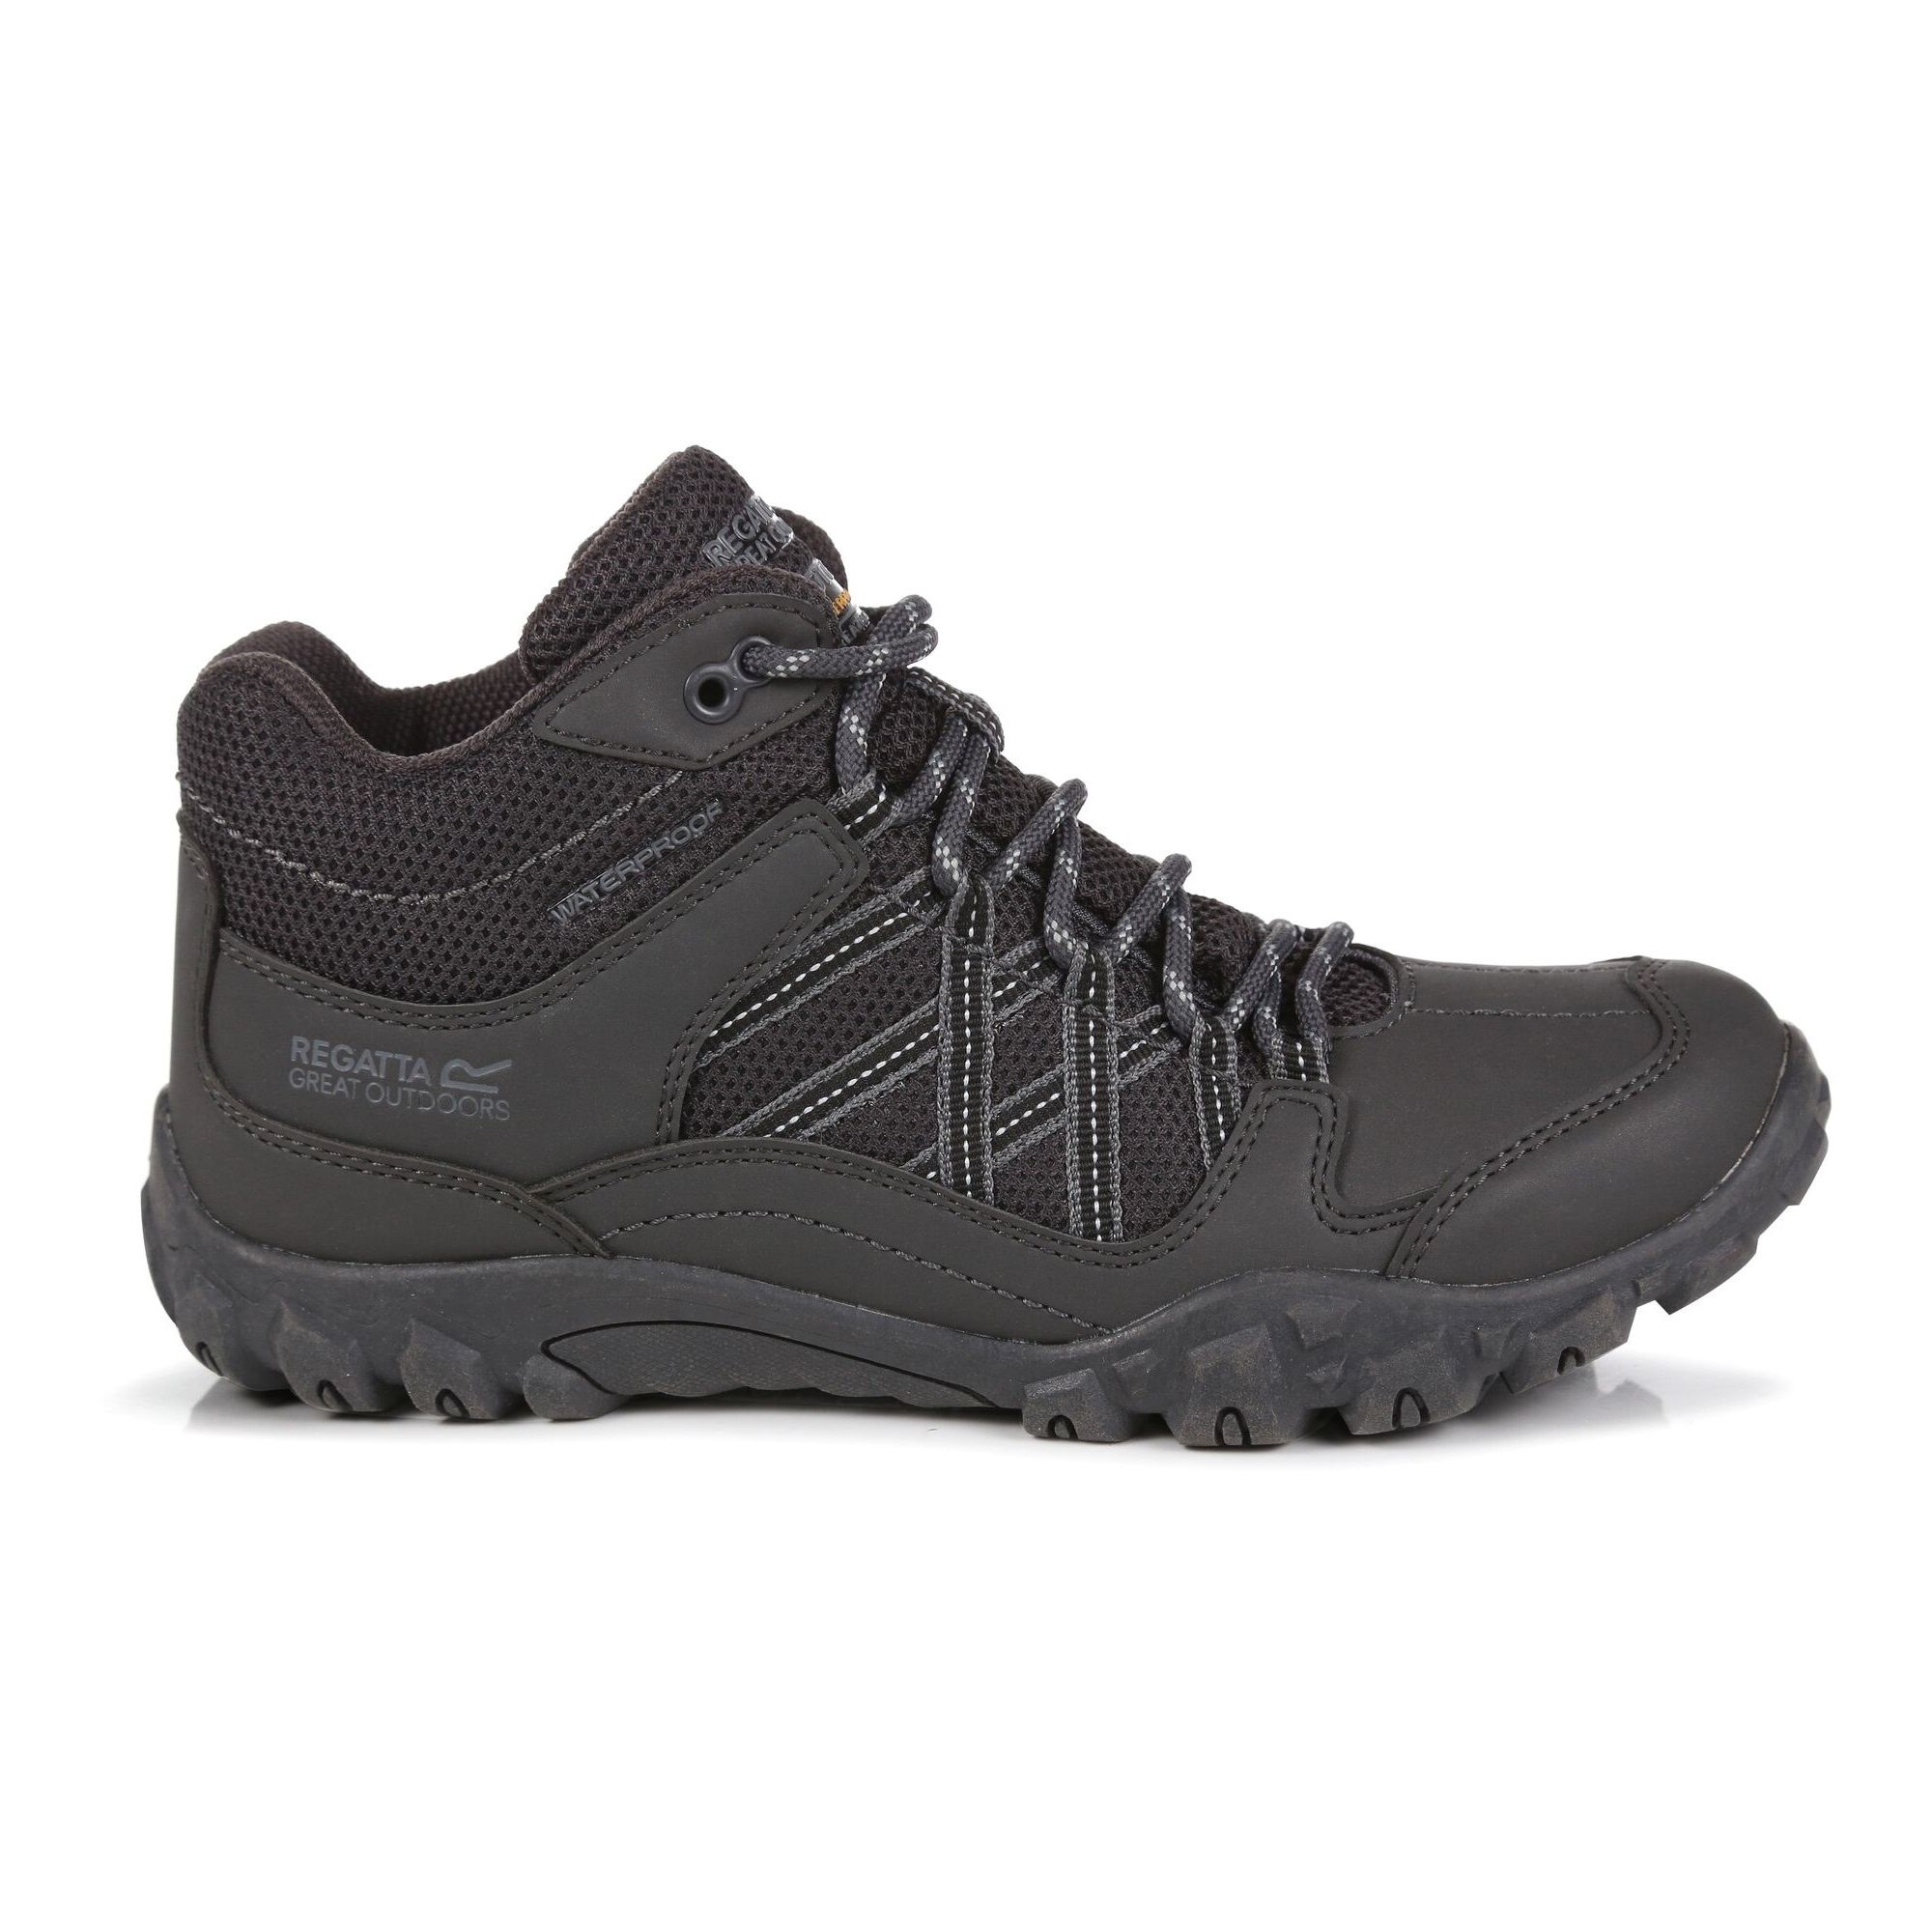 Material: PU nubuck: 100%. Hydropel water resistant technology. Isotex waterproof footwear. Seam sealed with internal membrane bootee liner. PU nubuck and breathable mesh upper. Deep padded neoprene collar and mesh tongue. Rubberised toe and heel bumpers. EVA comfort footbed. Stabilising shank technology for underfoot protection and to reduce foot fatigue. Lightweight low profile rubber outsole. Great grip and hardwearing.